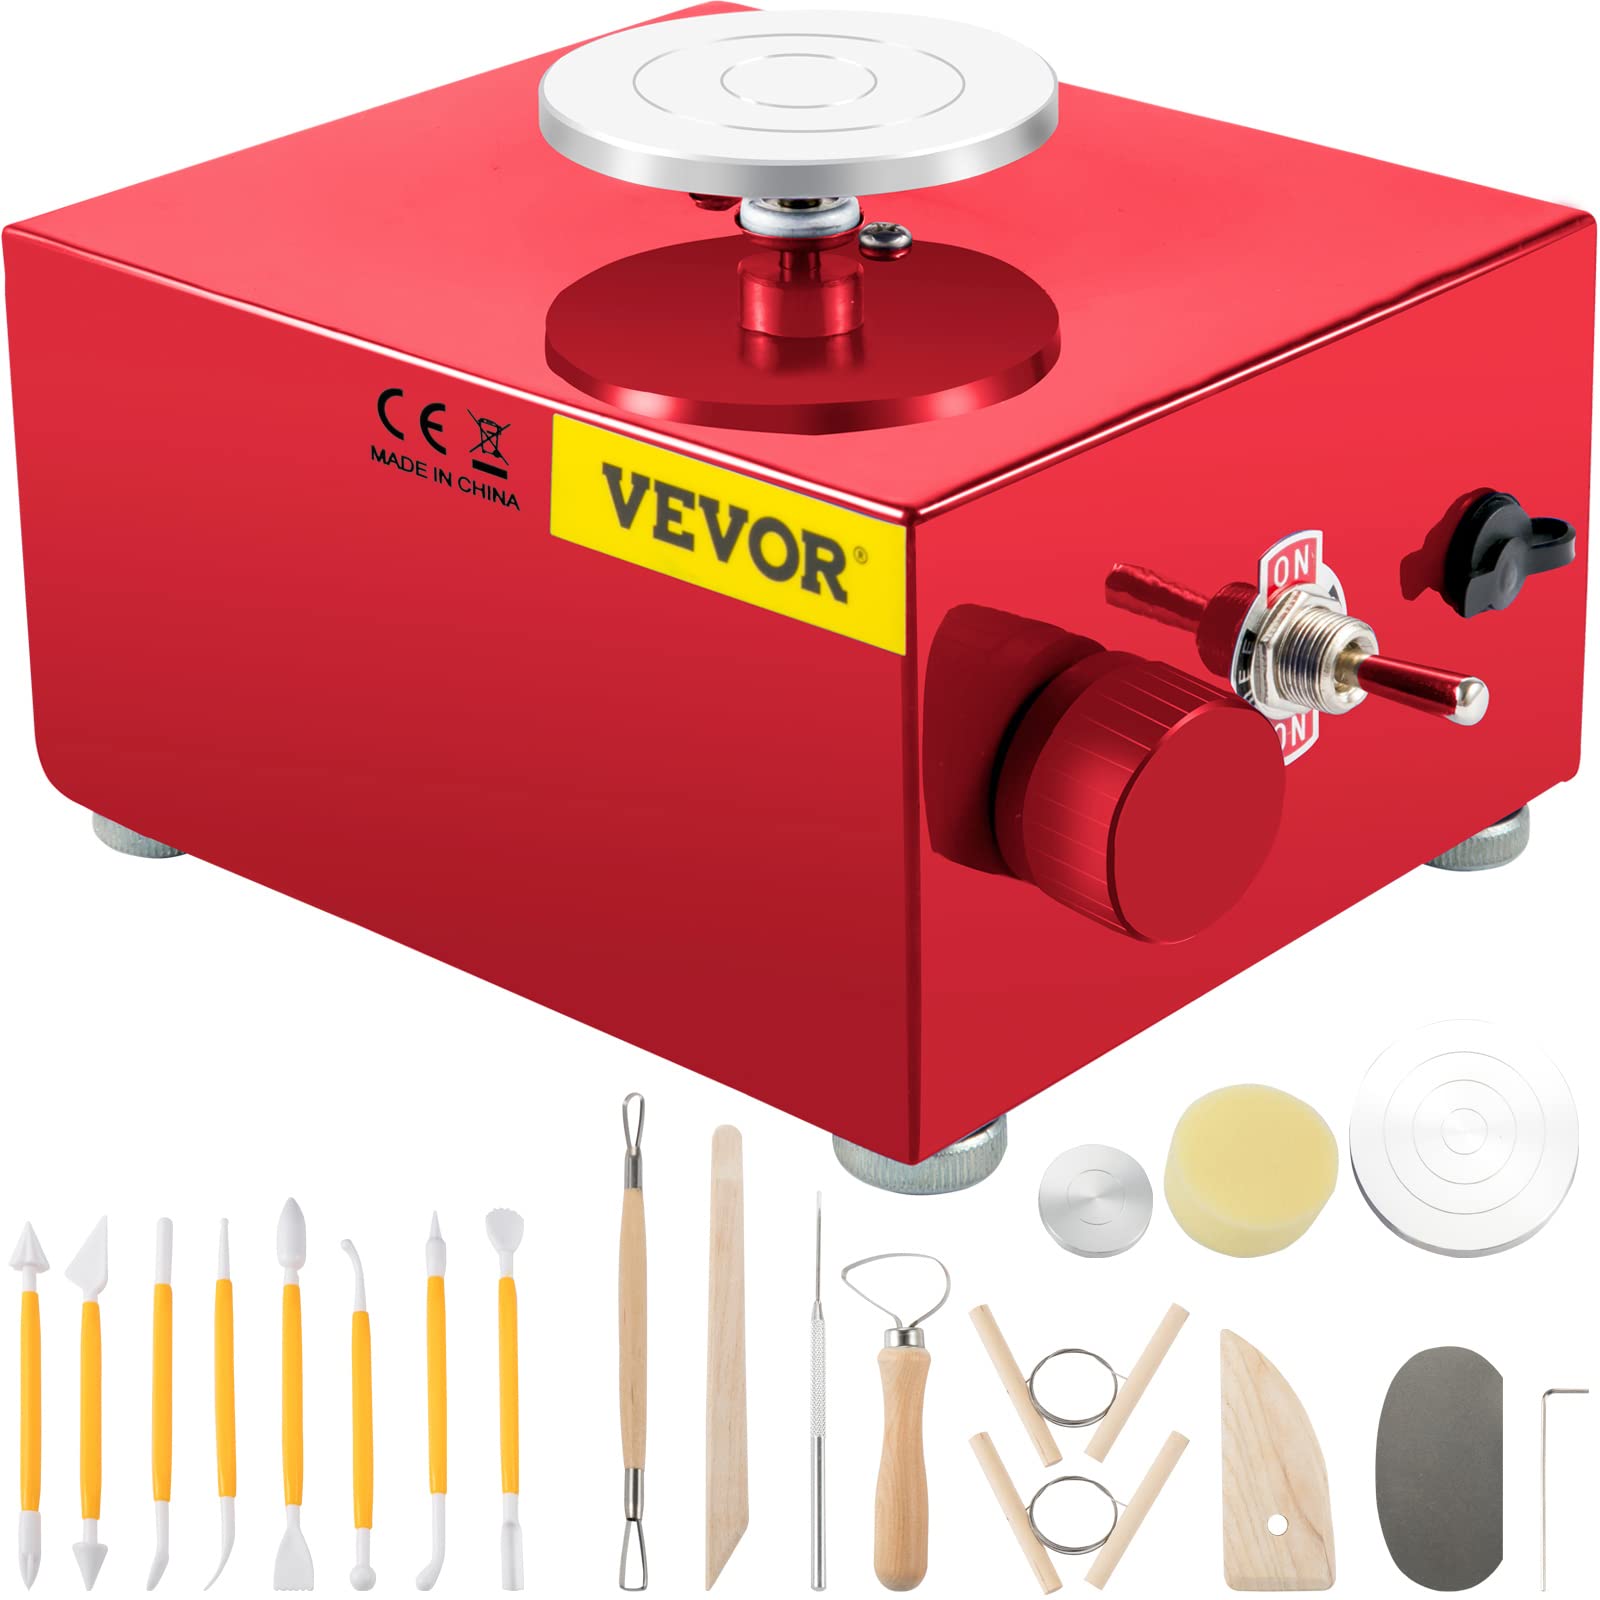 VEVOR Mini Pottery Wheel 30W Ceramic Wheel Adjustable Speed Clay Machines Electric Sculpting Kits with 3 Turntables Trays and 16